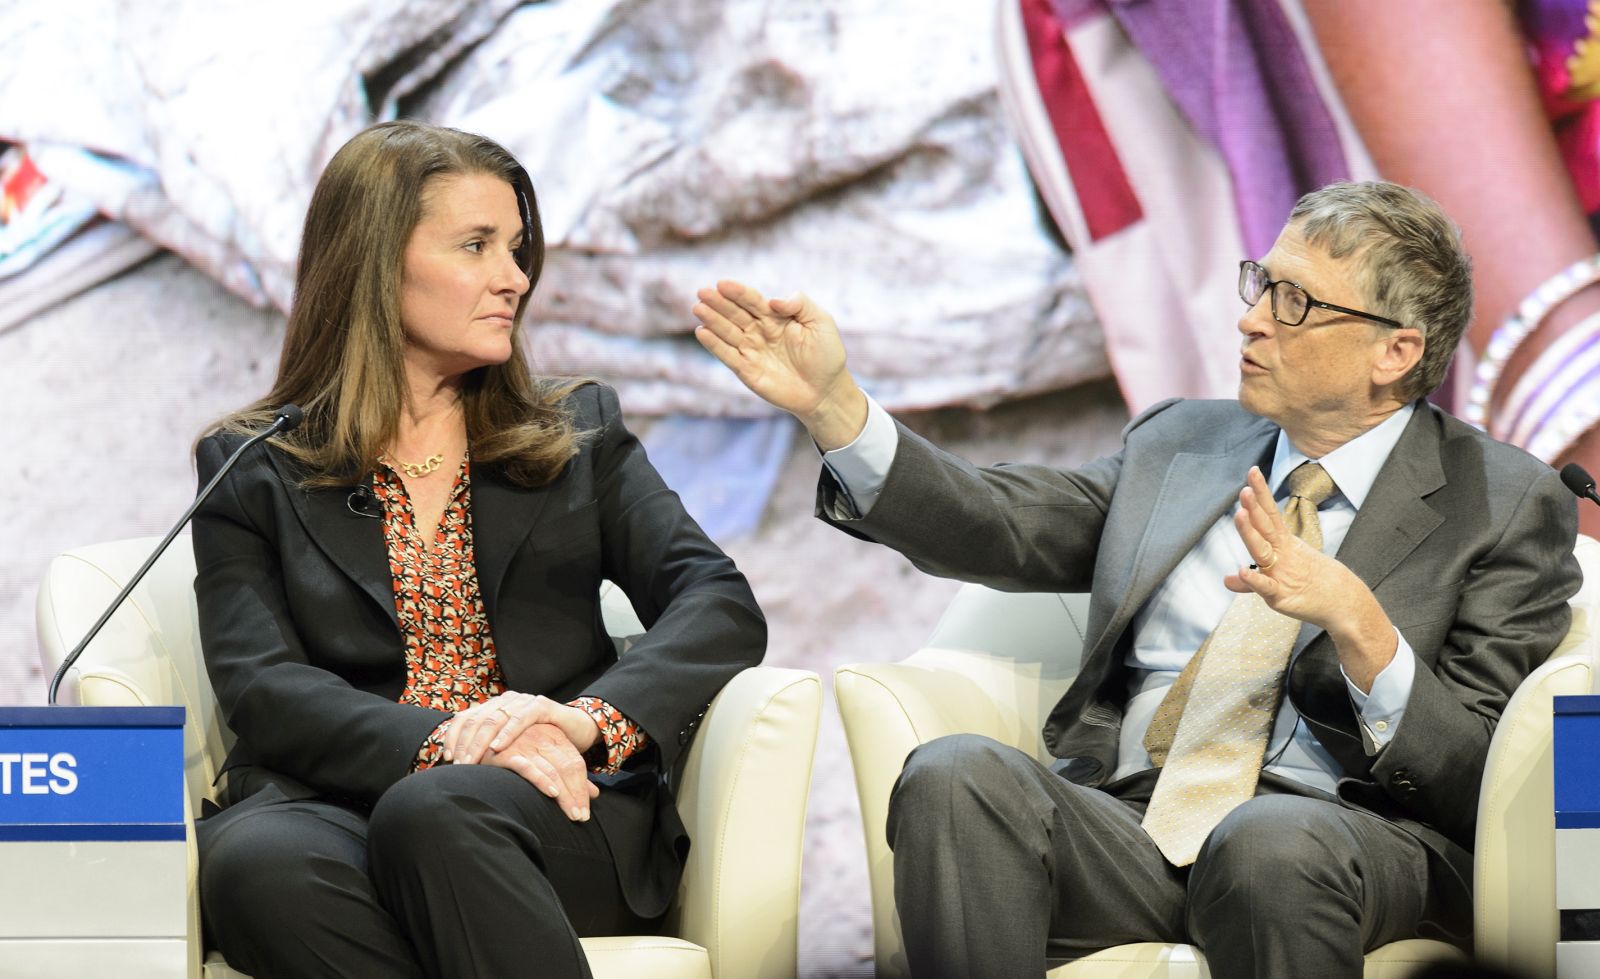 epa09176365 (FILE) - Melinda French Gates, Co-Chair, Bill & Melinda Gates, (L), and William H. Gates III, Co-Chair, Bill & Melinda Gates Foundation, (R), speak during a panel session at the 45th Annual Meeting of the World Economic Forum, WEF, in Davos, Switzerland, 23 January 2015 (reissued 03 May 2021). Bill and Melinda Gates are splitting up after 27 years of marriage, Bill Gates announced on 03 May 2021 in a tweet.  EPA/JEAN-CHRISTOPHE BOTT *** Local Caption *** 51756873